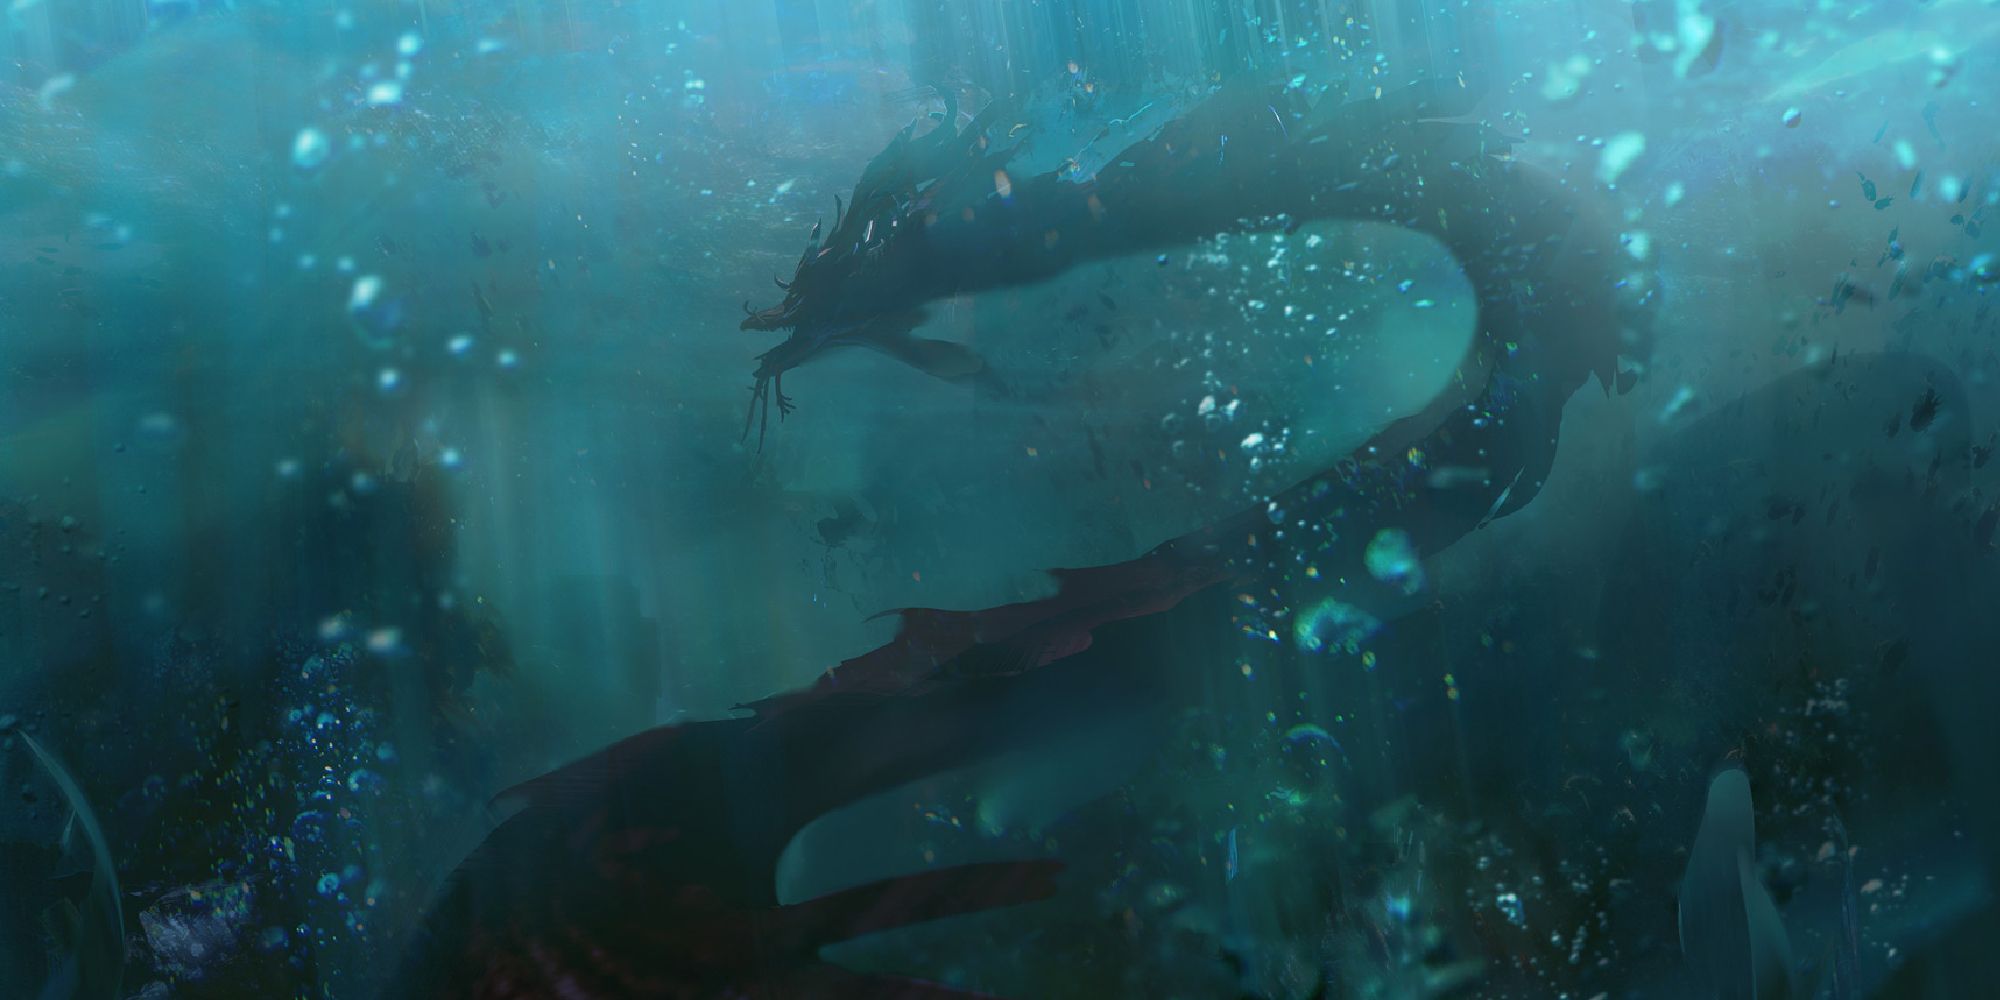 gw2 soo won under water for promotional art